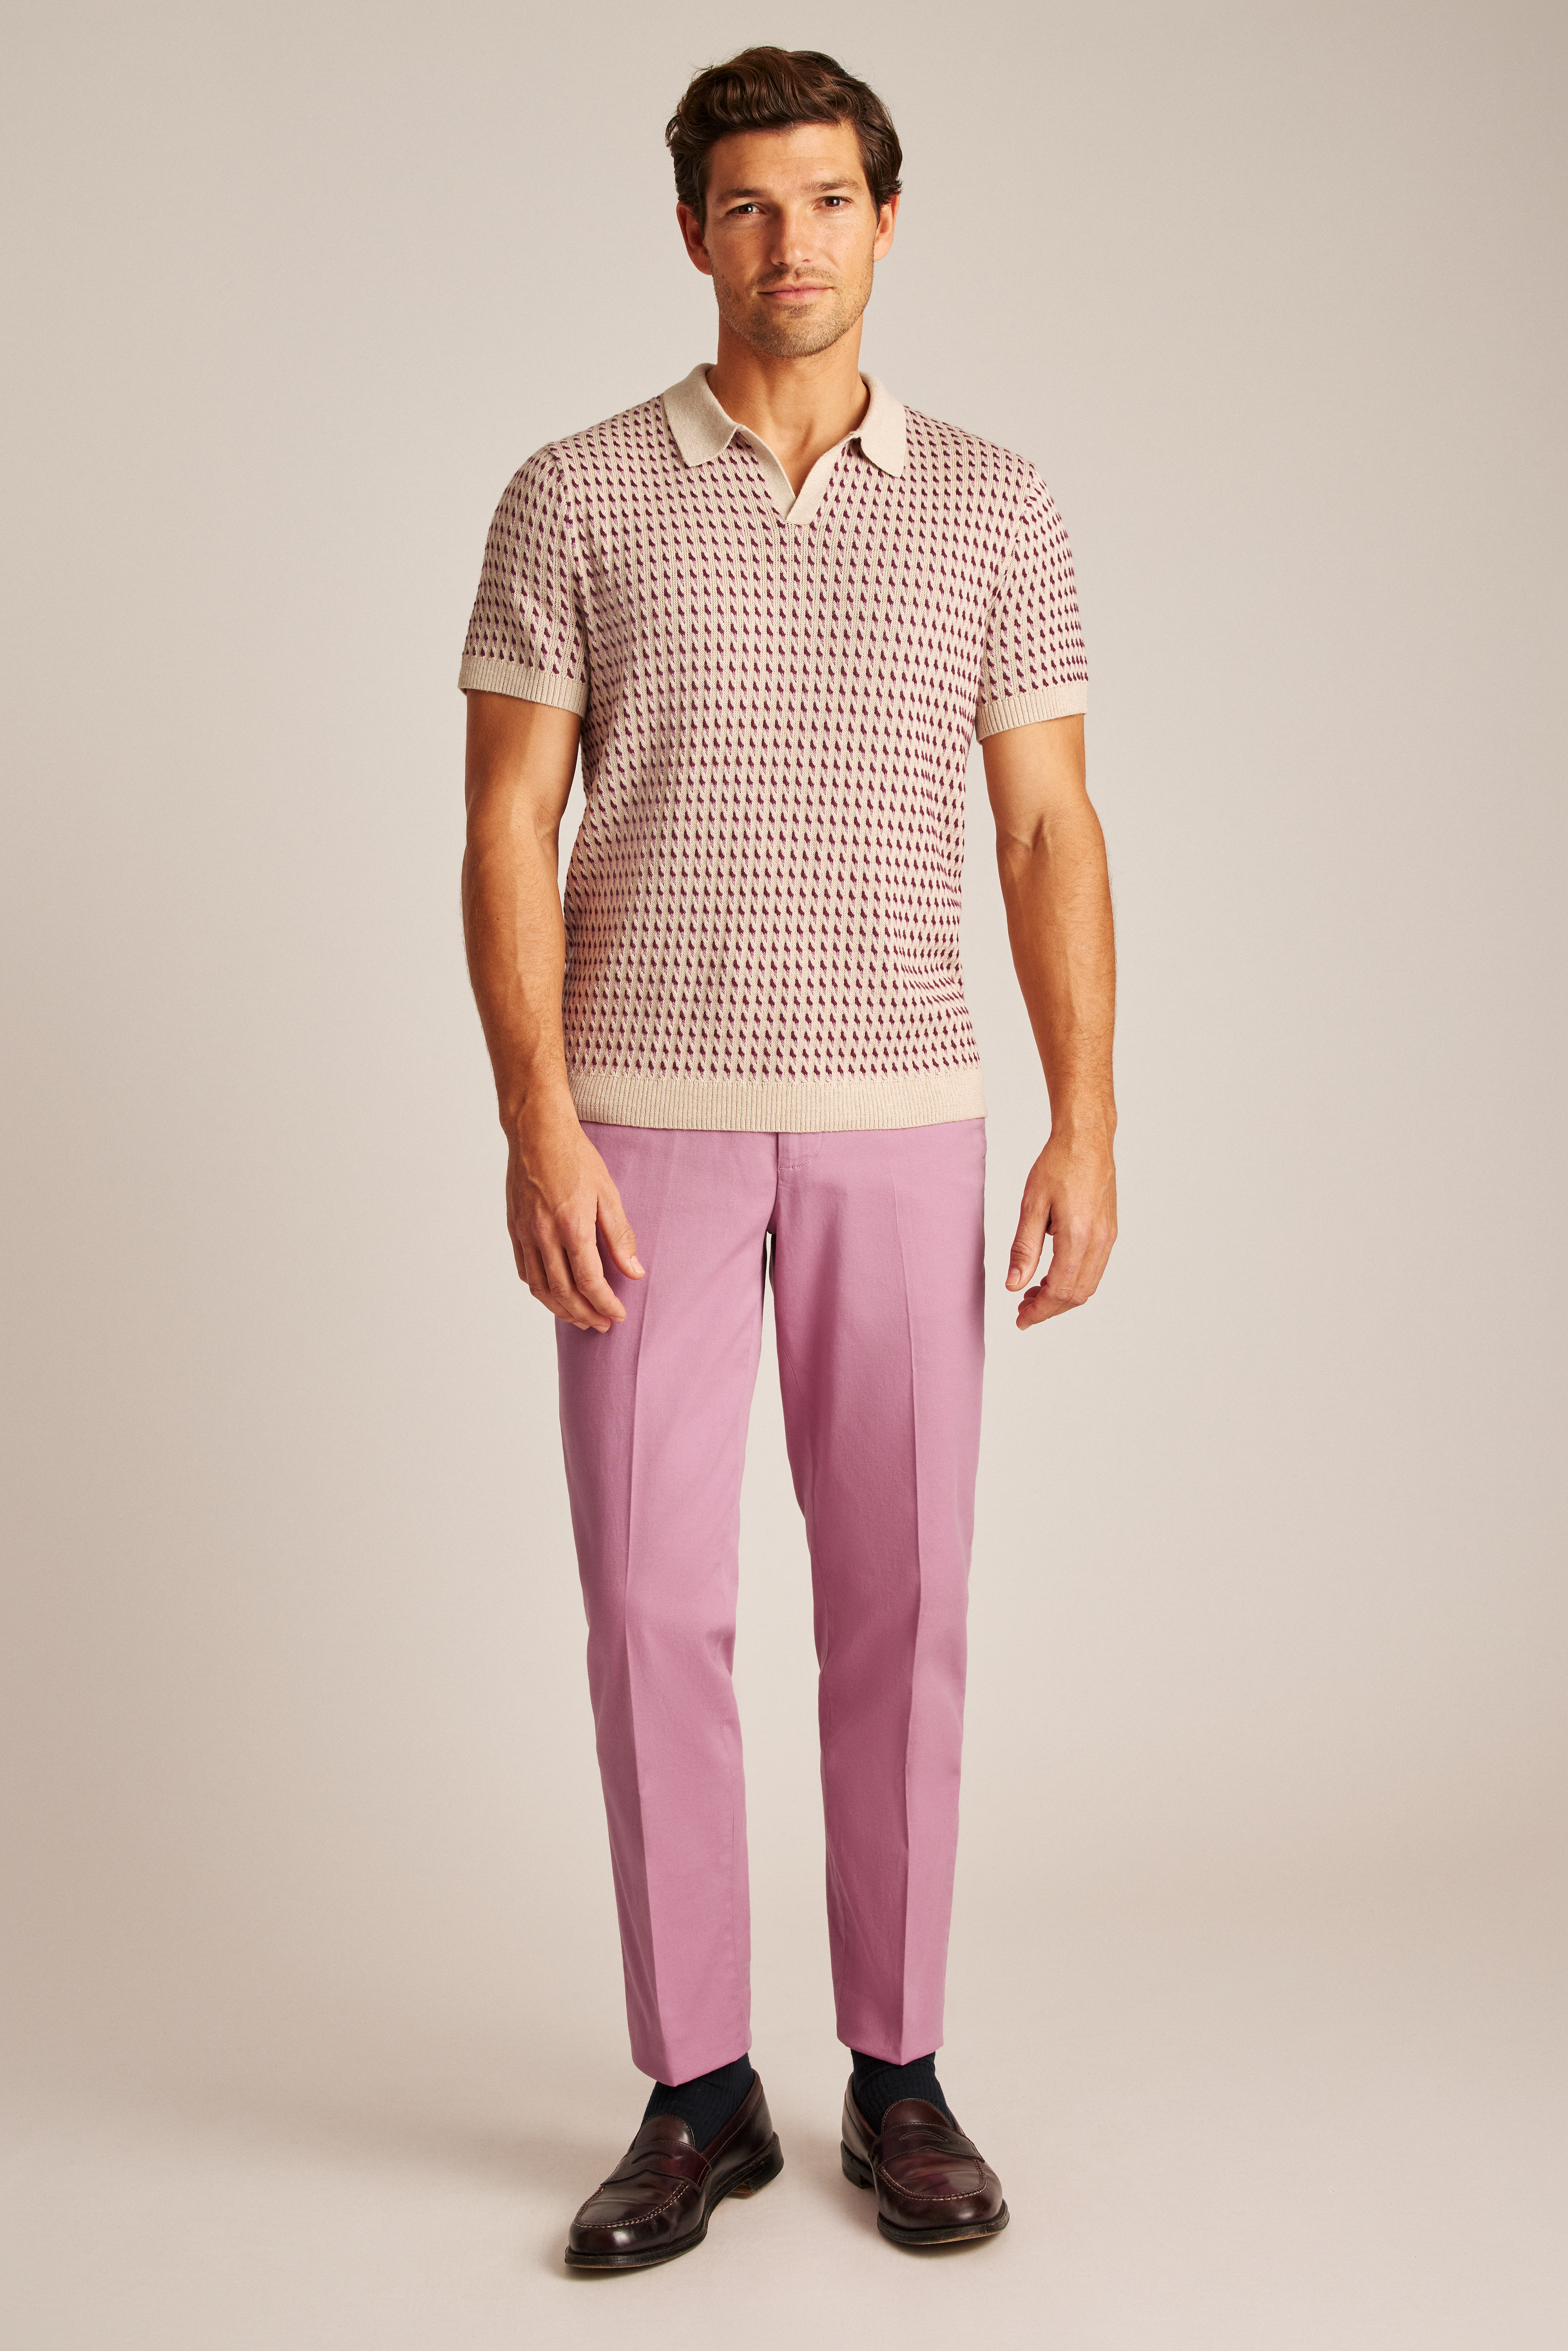 Real men wear pink | Pink pants outfit, Men fashion casual outfits, Mens  outfits